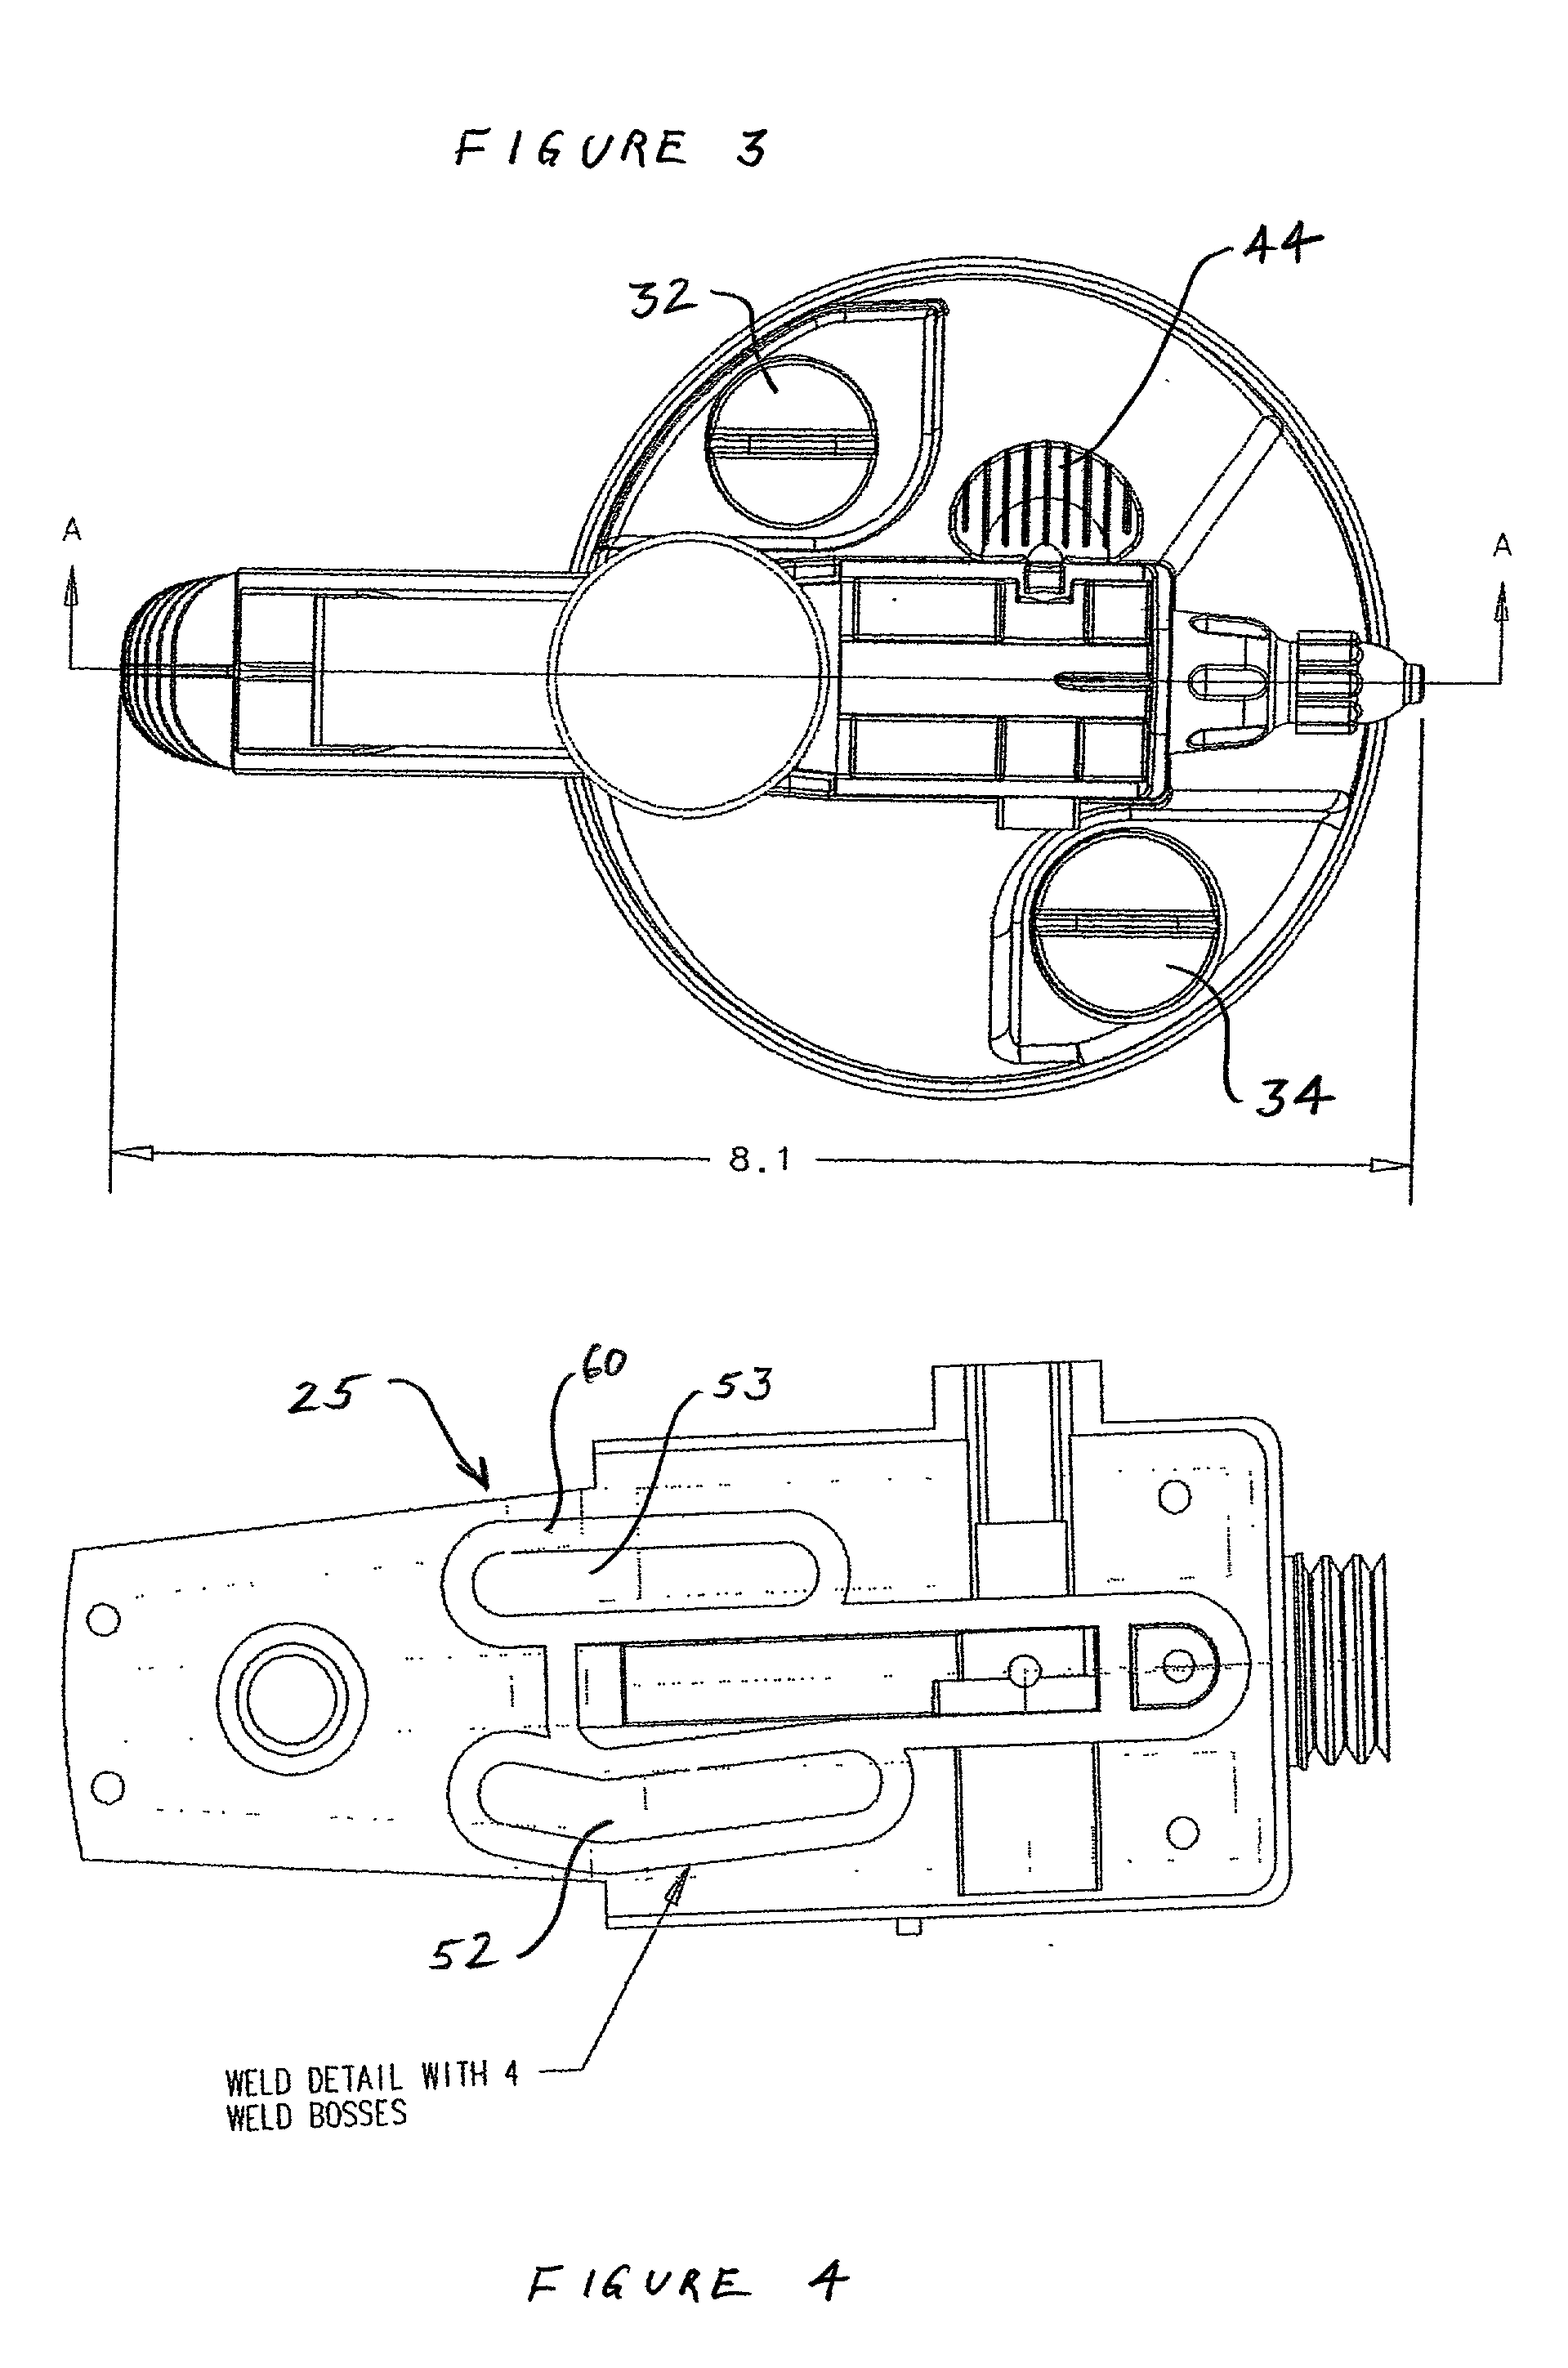 Apparatus for metering, mixing, and spraying component liquids